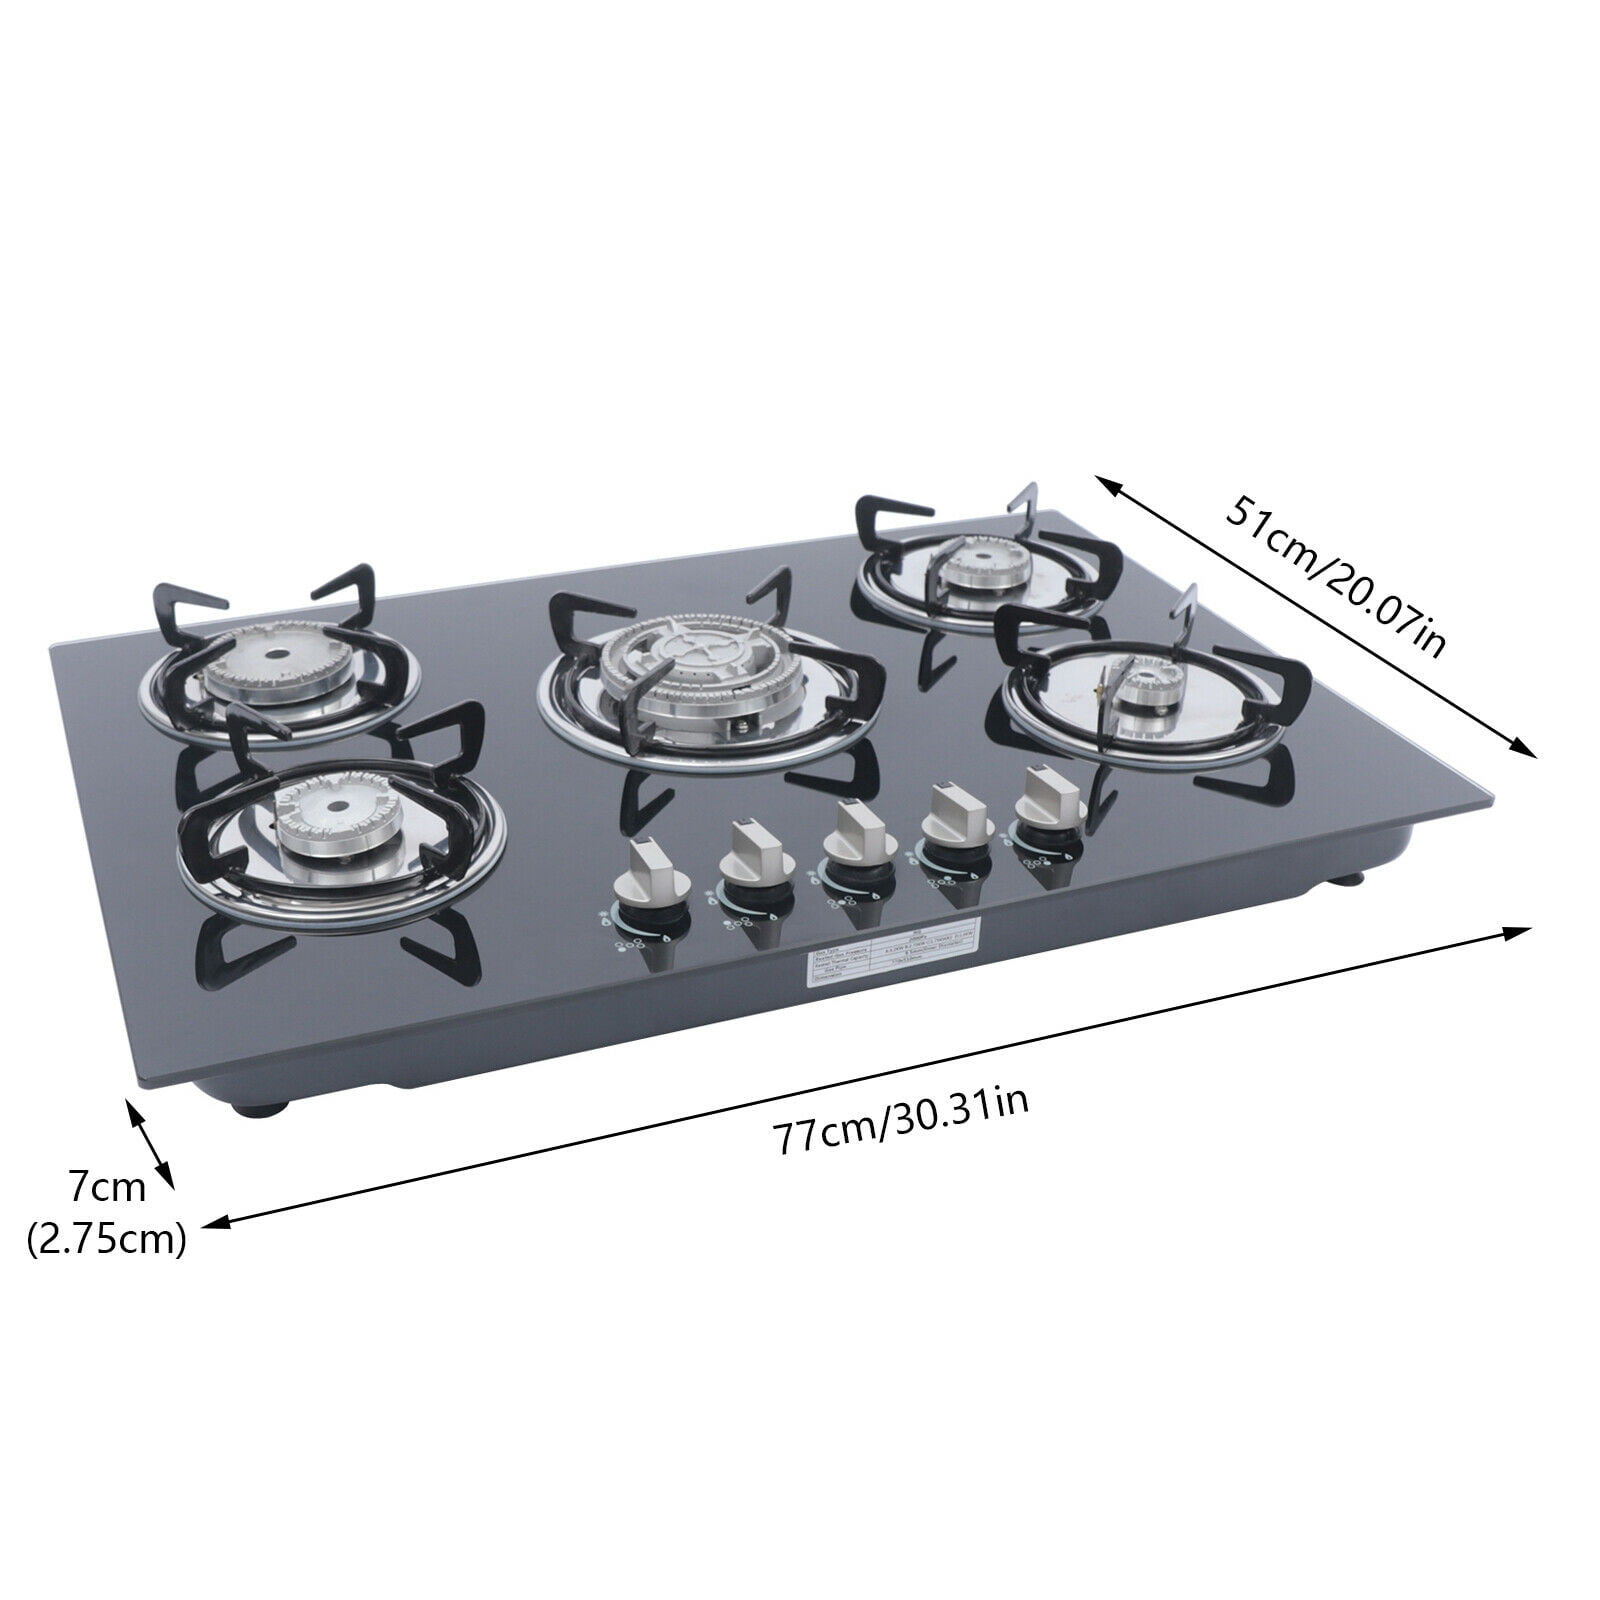 Tabu Built-in GAS Cooktop, Stainless Steel GAS Stove Countertop, Easy to Clean (5 Burners) Color: Black 410072210WTA